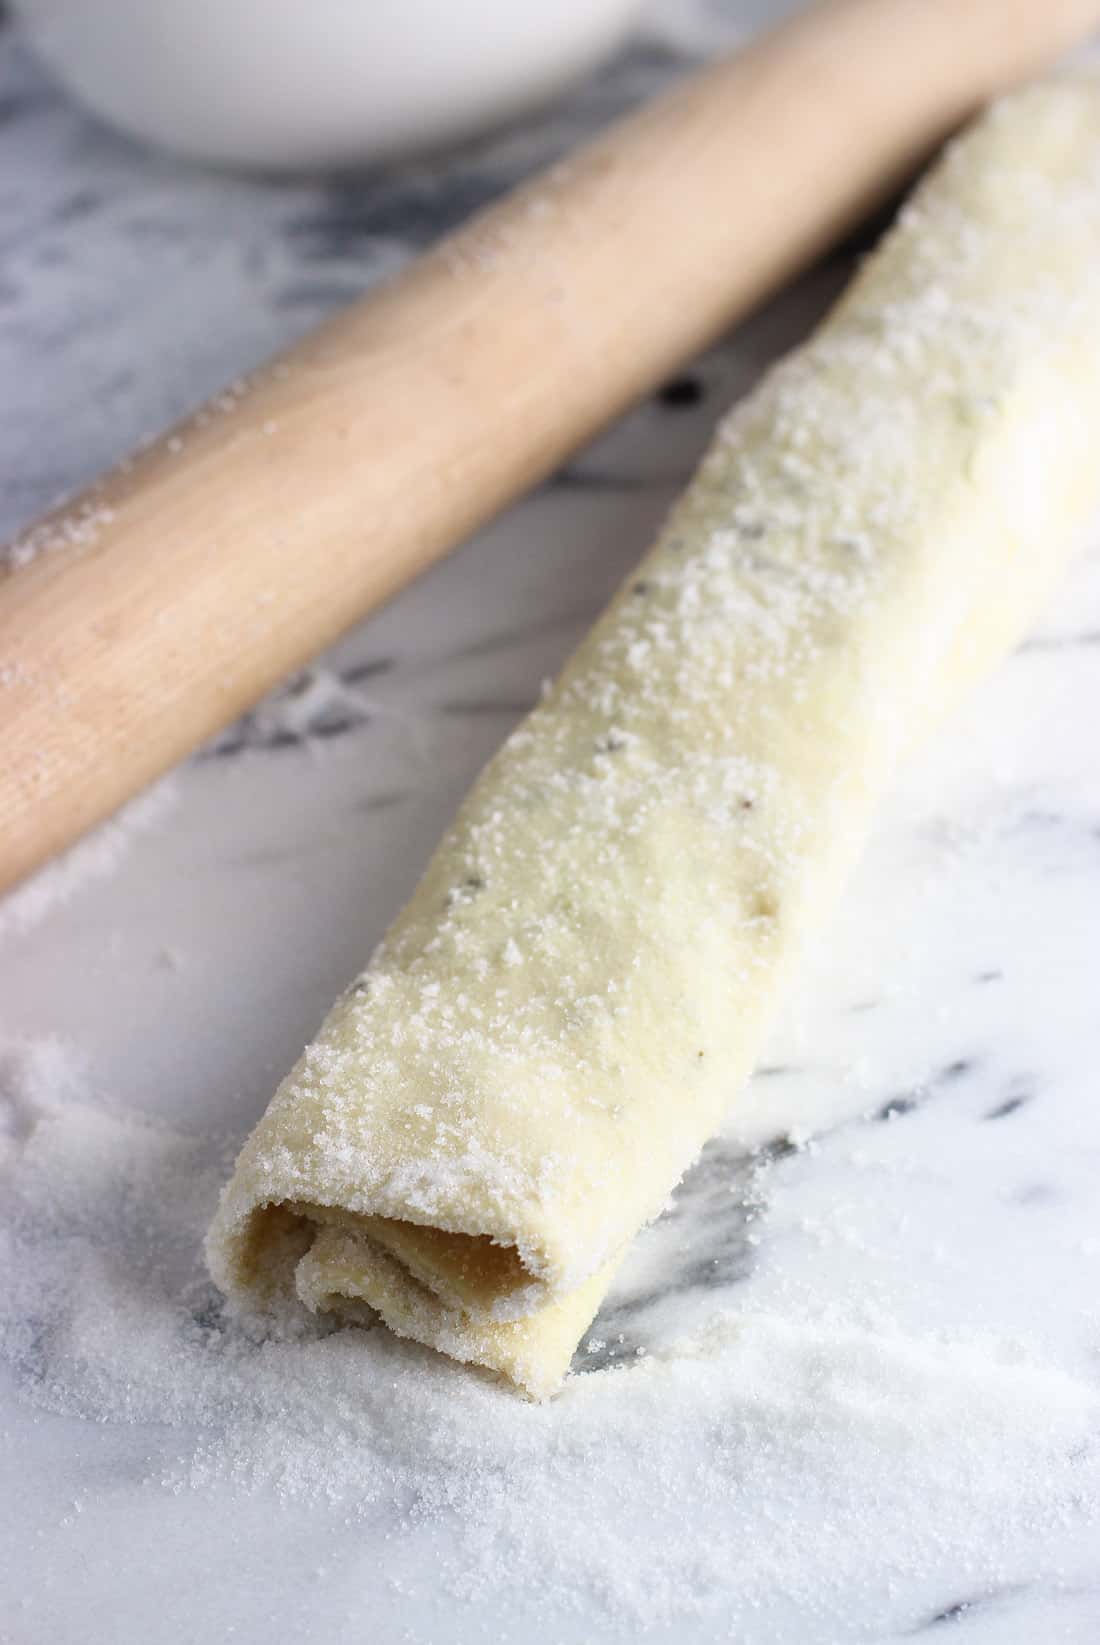 Rolled up puff pastry on a marble board next to a wooden rolling pin